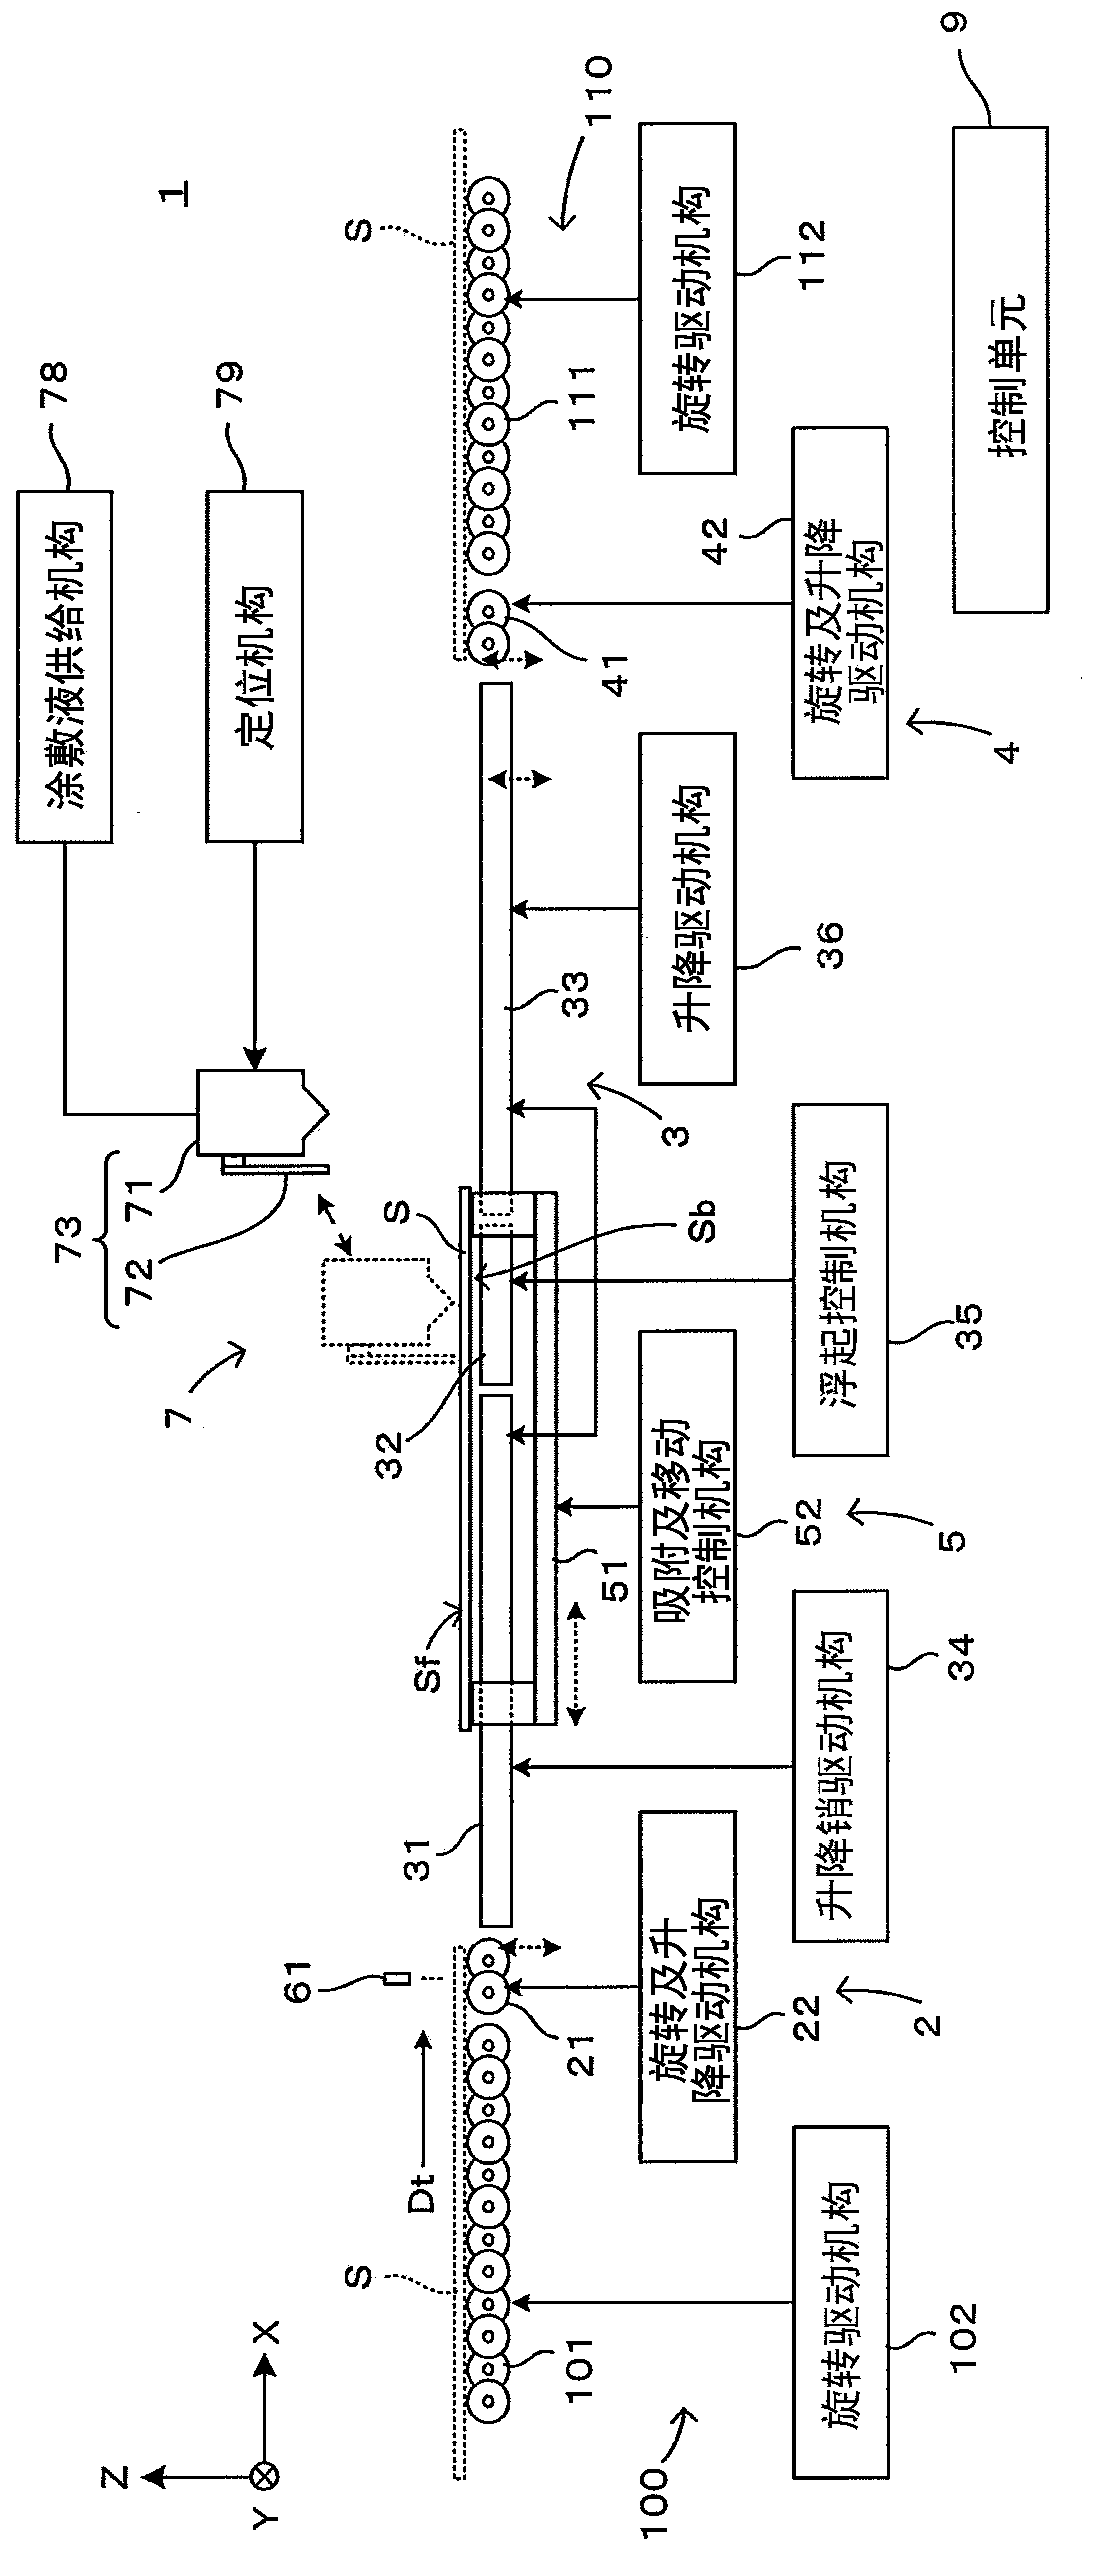 A substrate processing apparatus and a substrate processing method